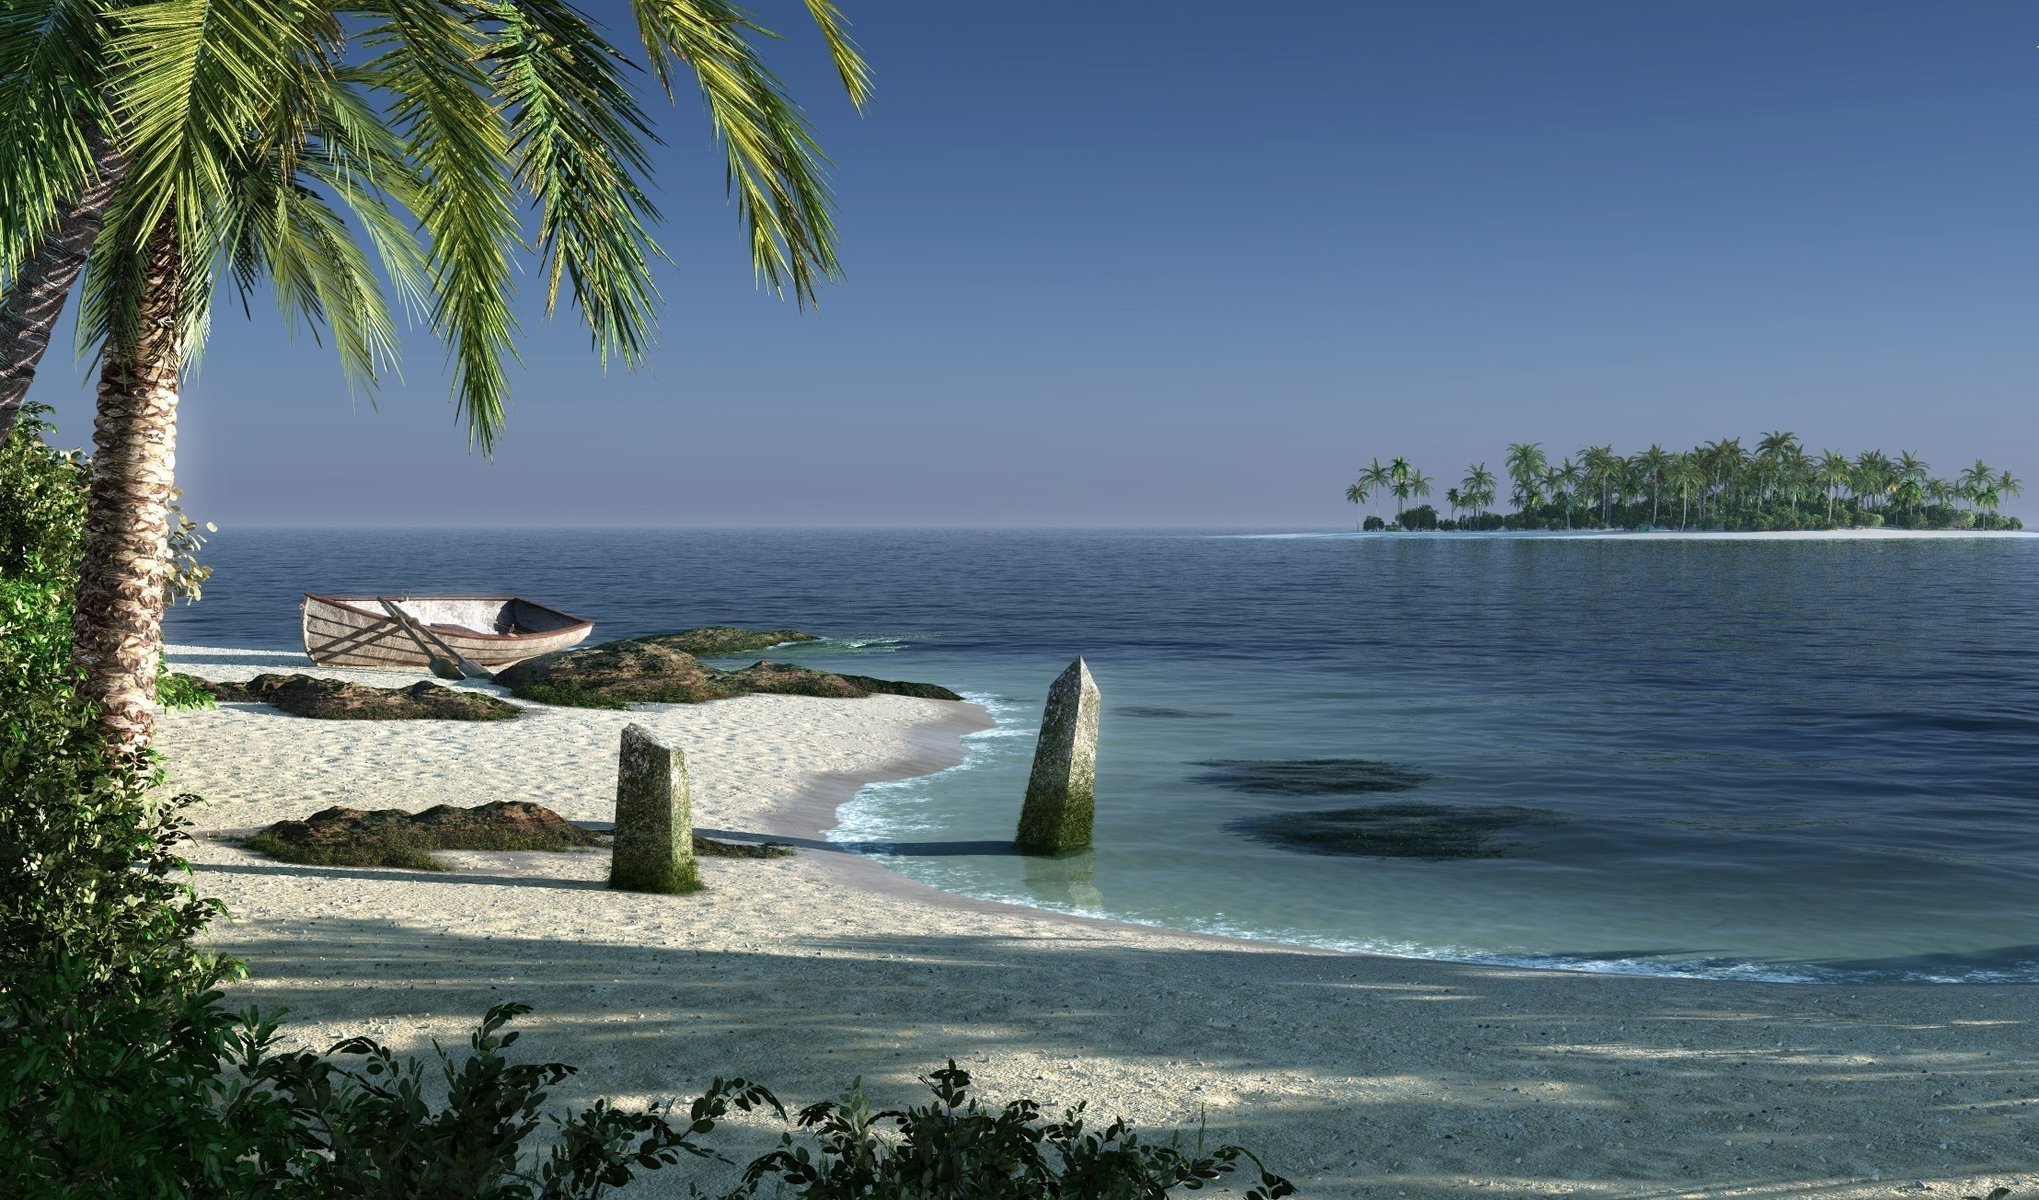 Palm trees on the shore of the island